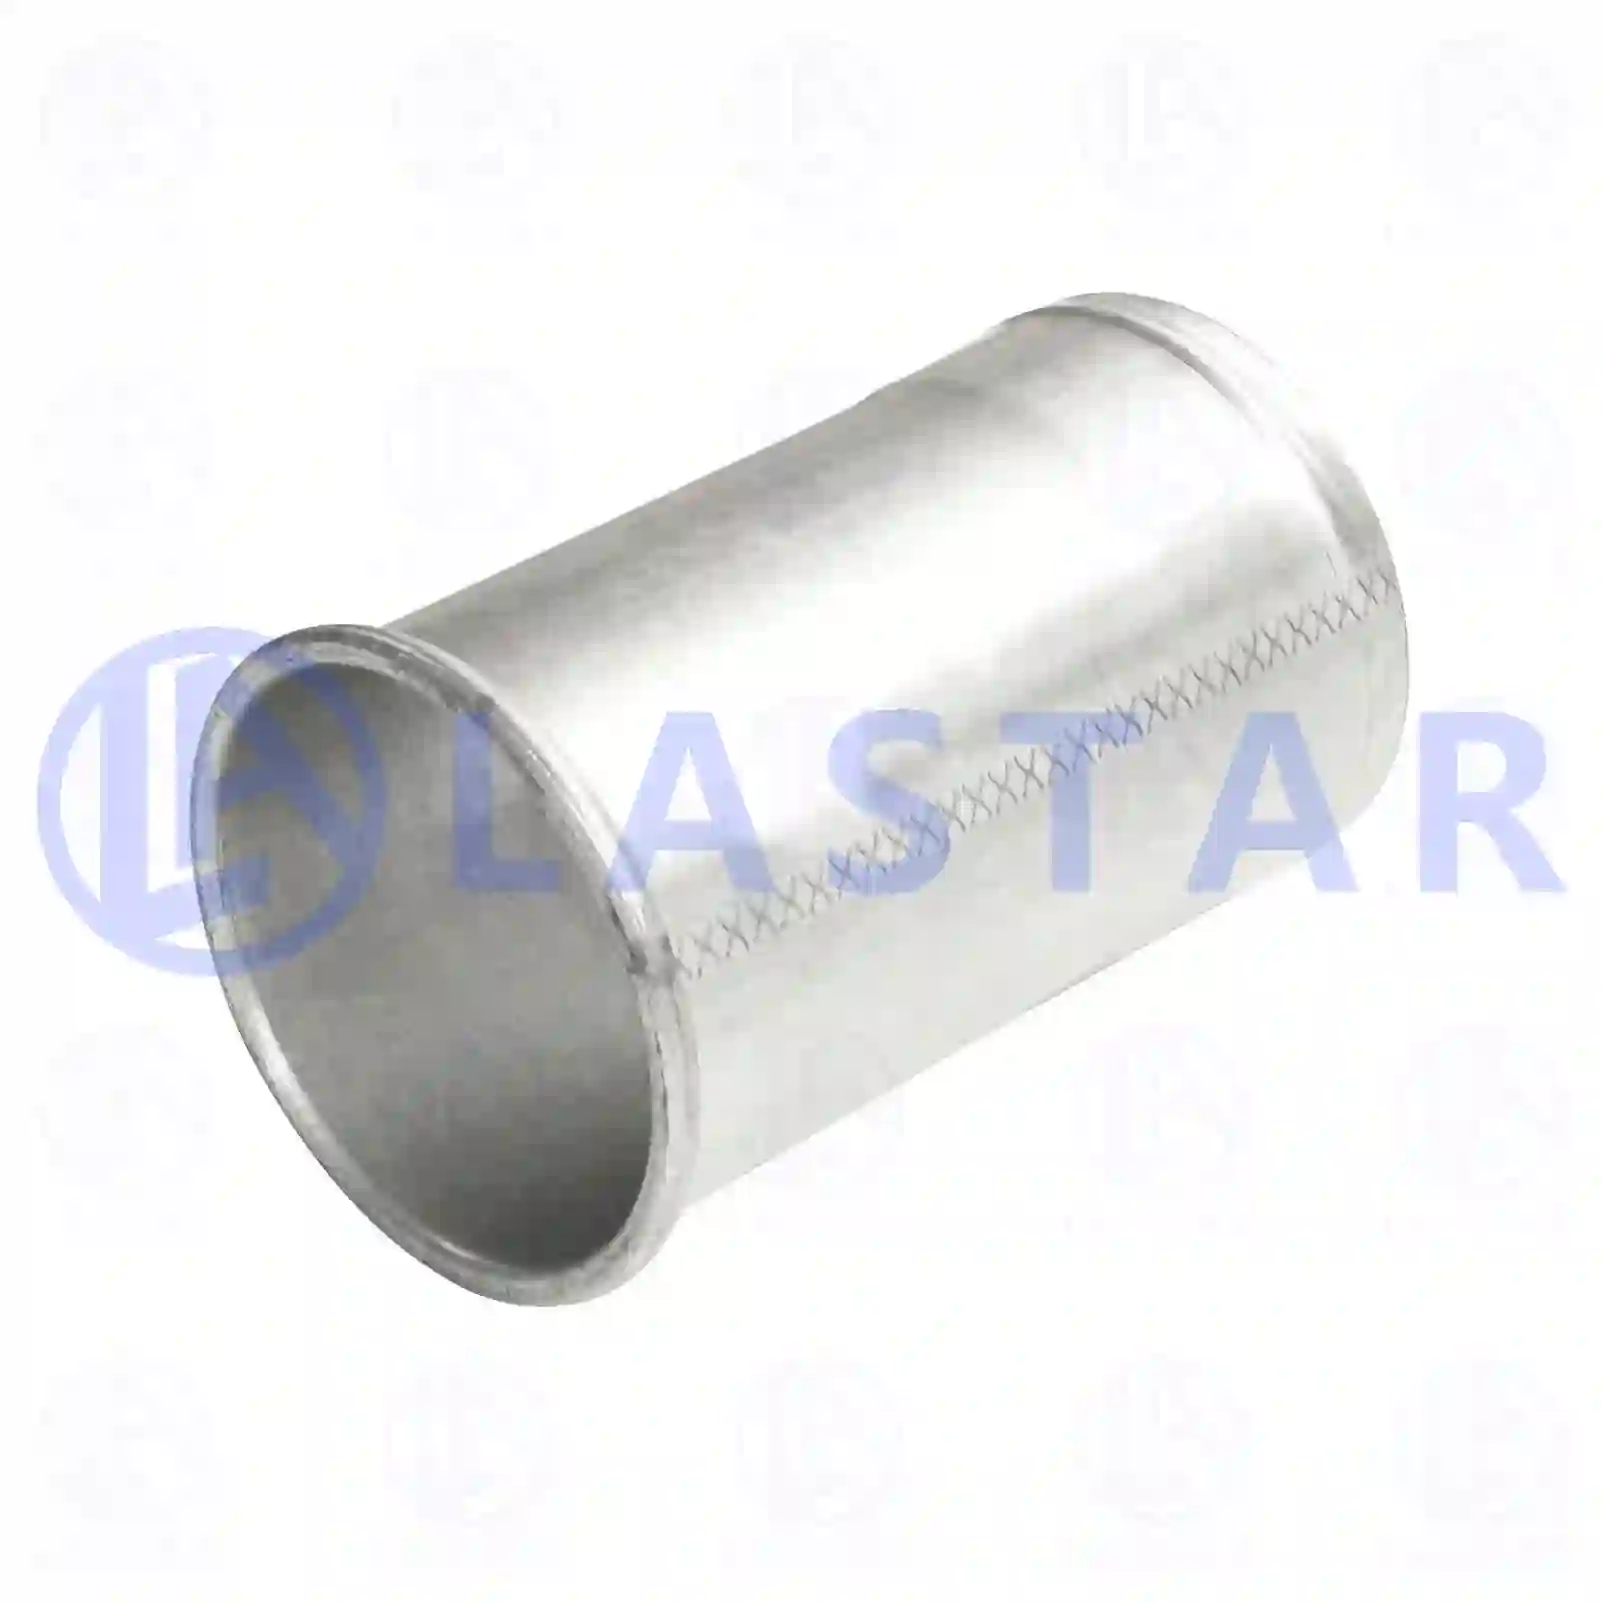 End pipe, 77706782, 41021461, ZG10287-0008 ||  77706782 Lastar Spare Part | Truck Spare Parts, Auotomotive Spare Parts End pipe, 77706782, 41021461, ZG10287-0008 ||  77706782 Lastar Spare Part | Truck Spare Parts, Auotomotive Spare Parts